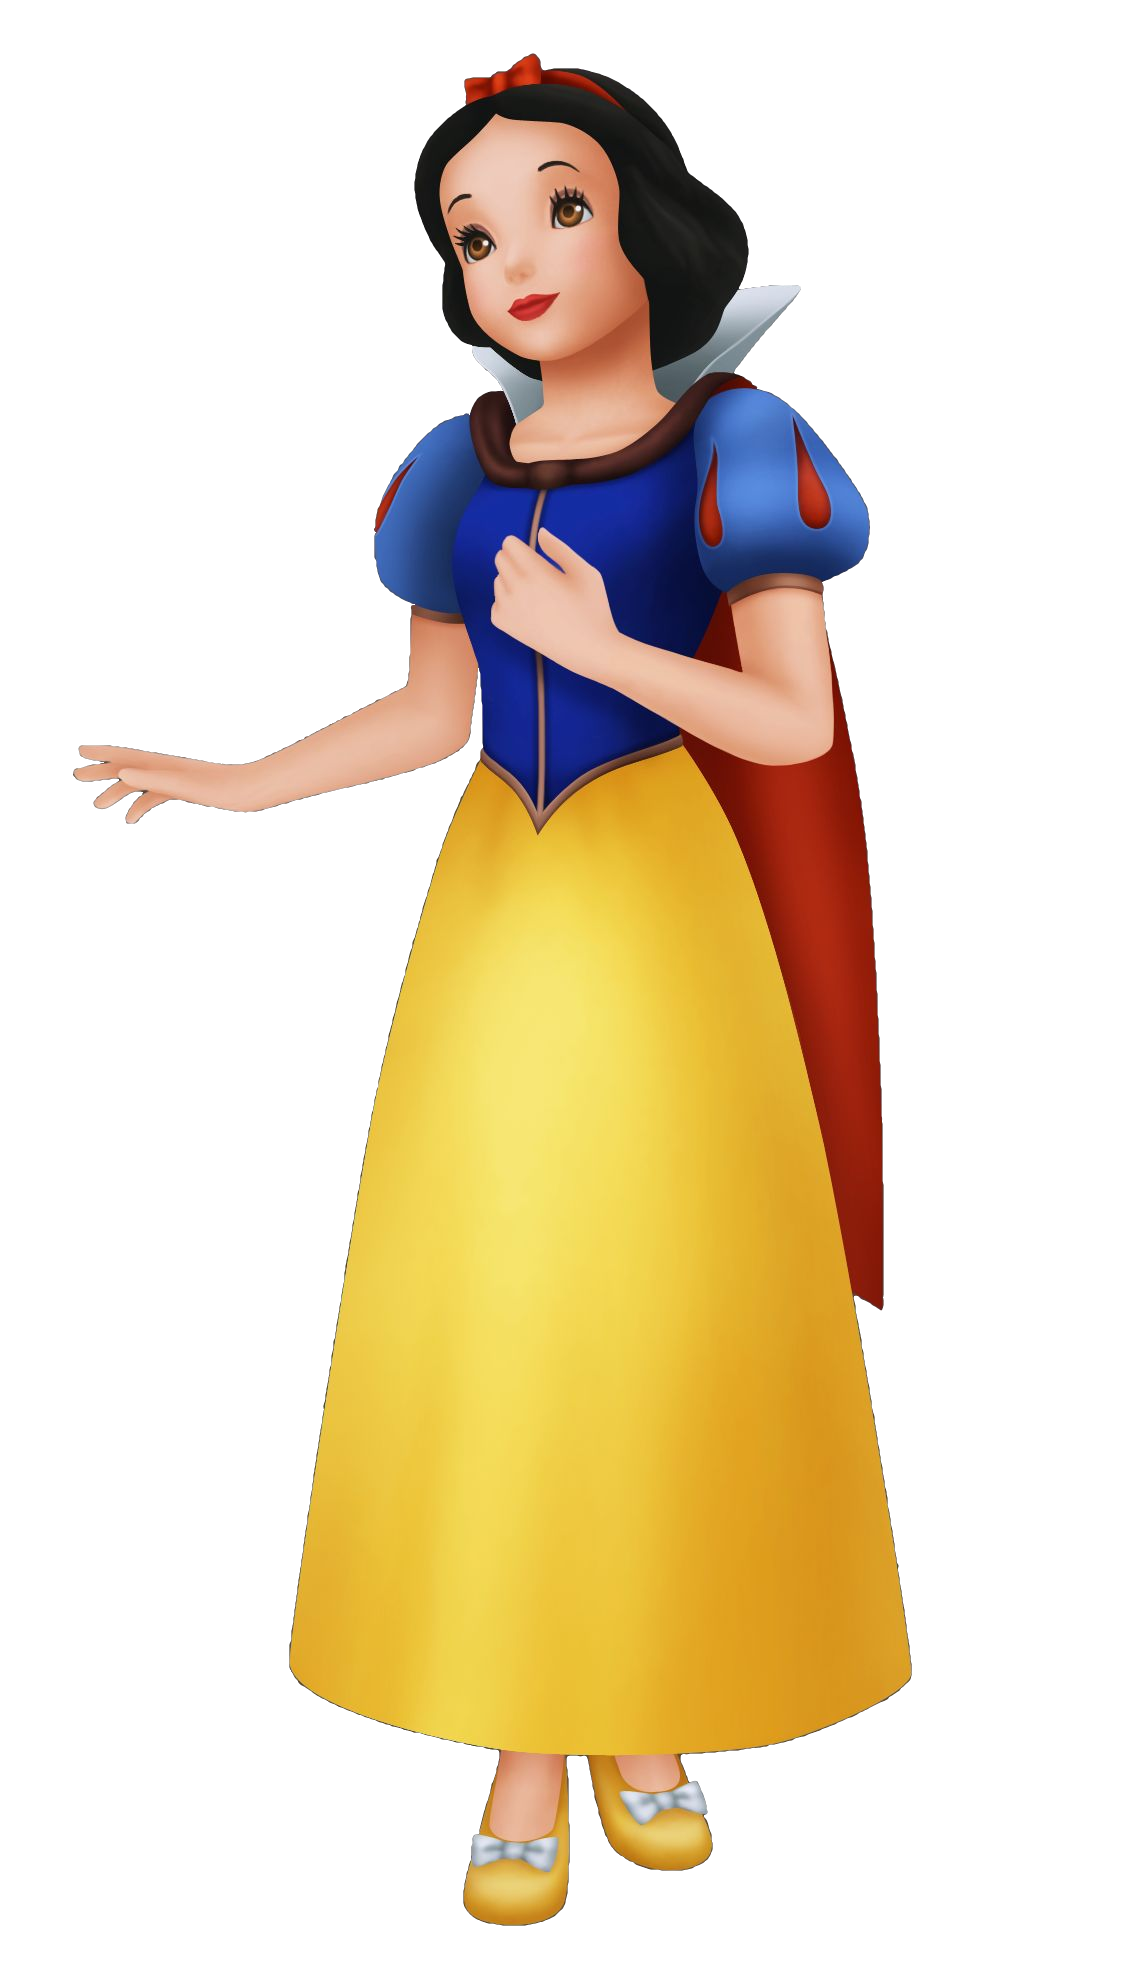 Snow White PNG Free Download